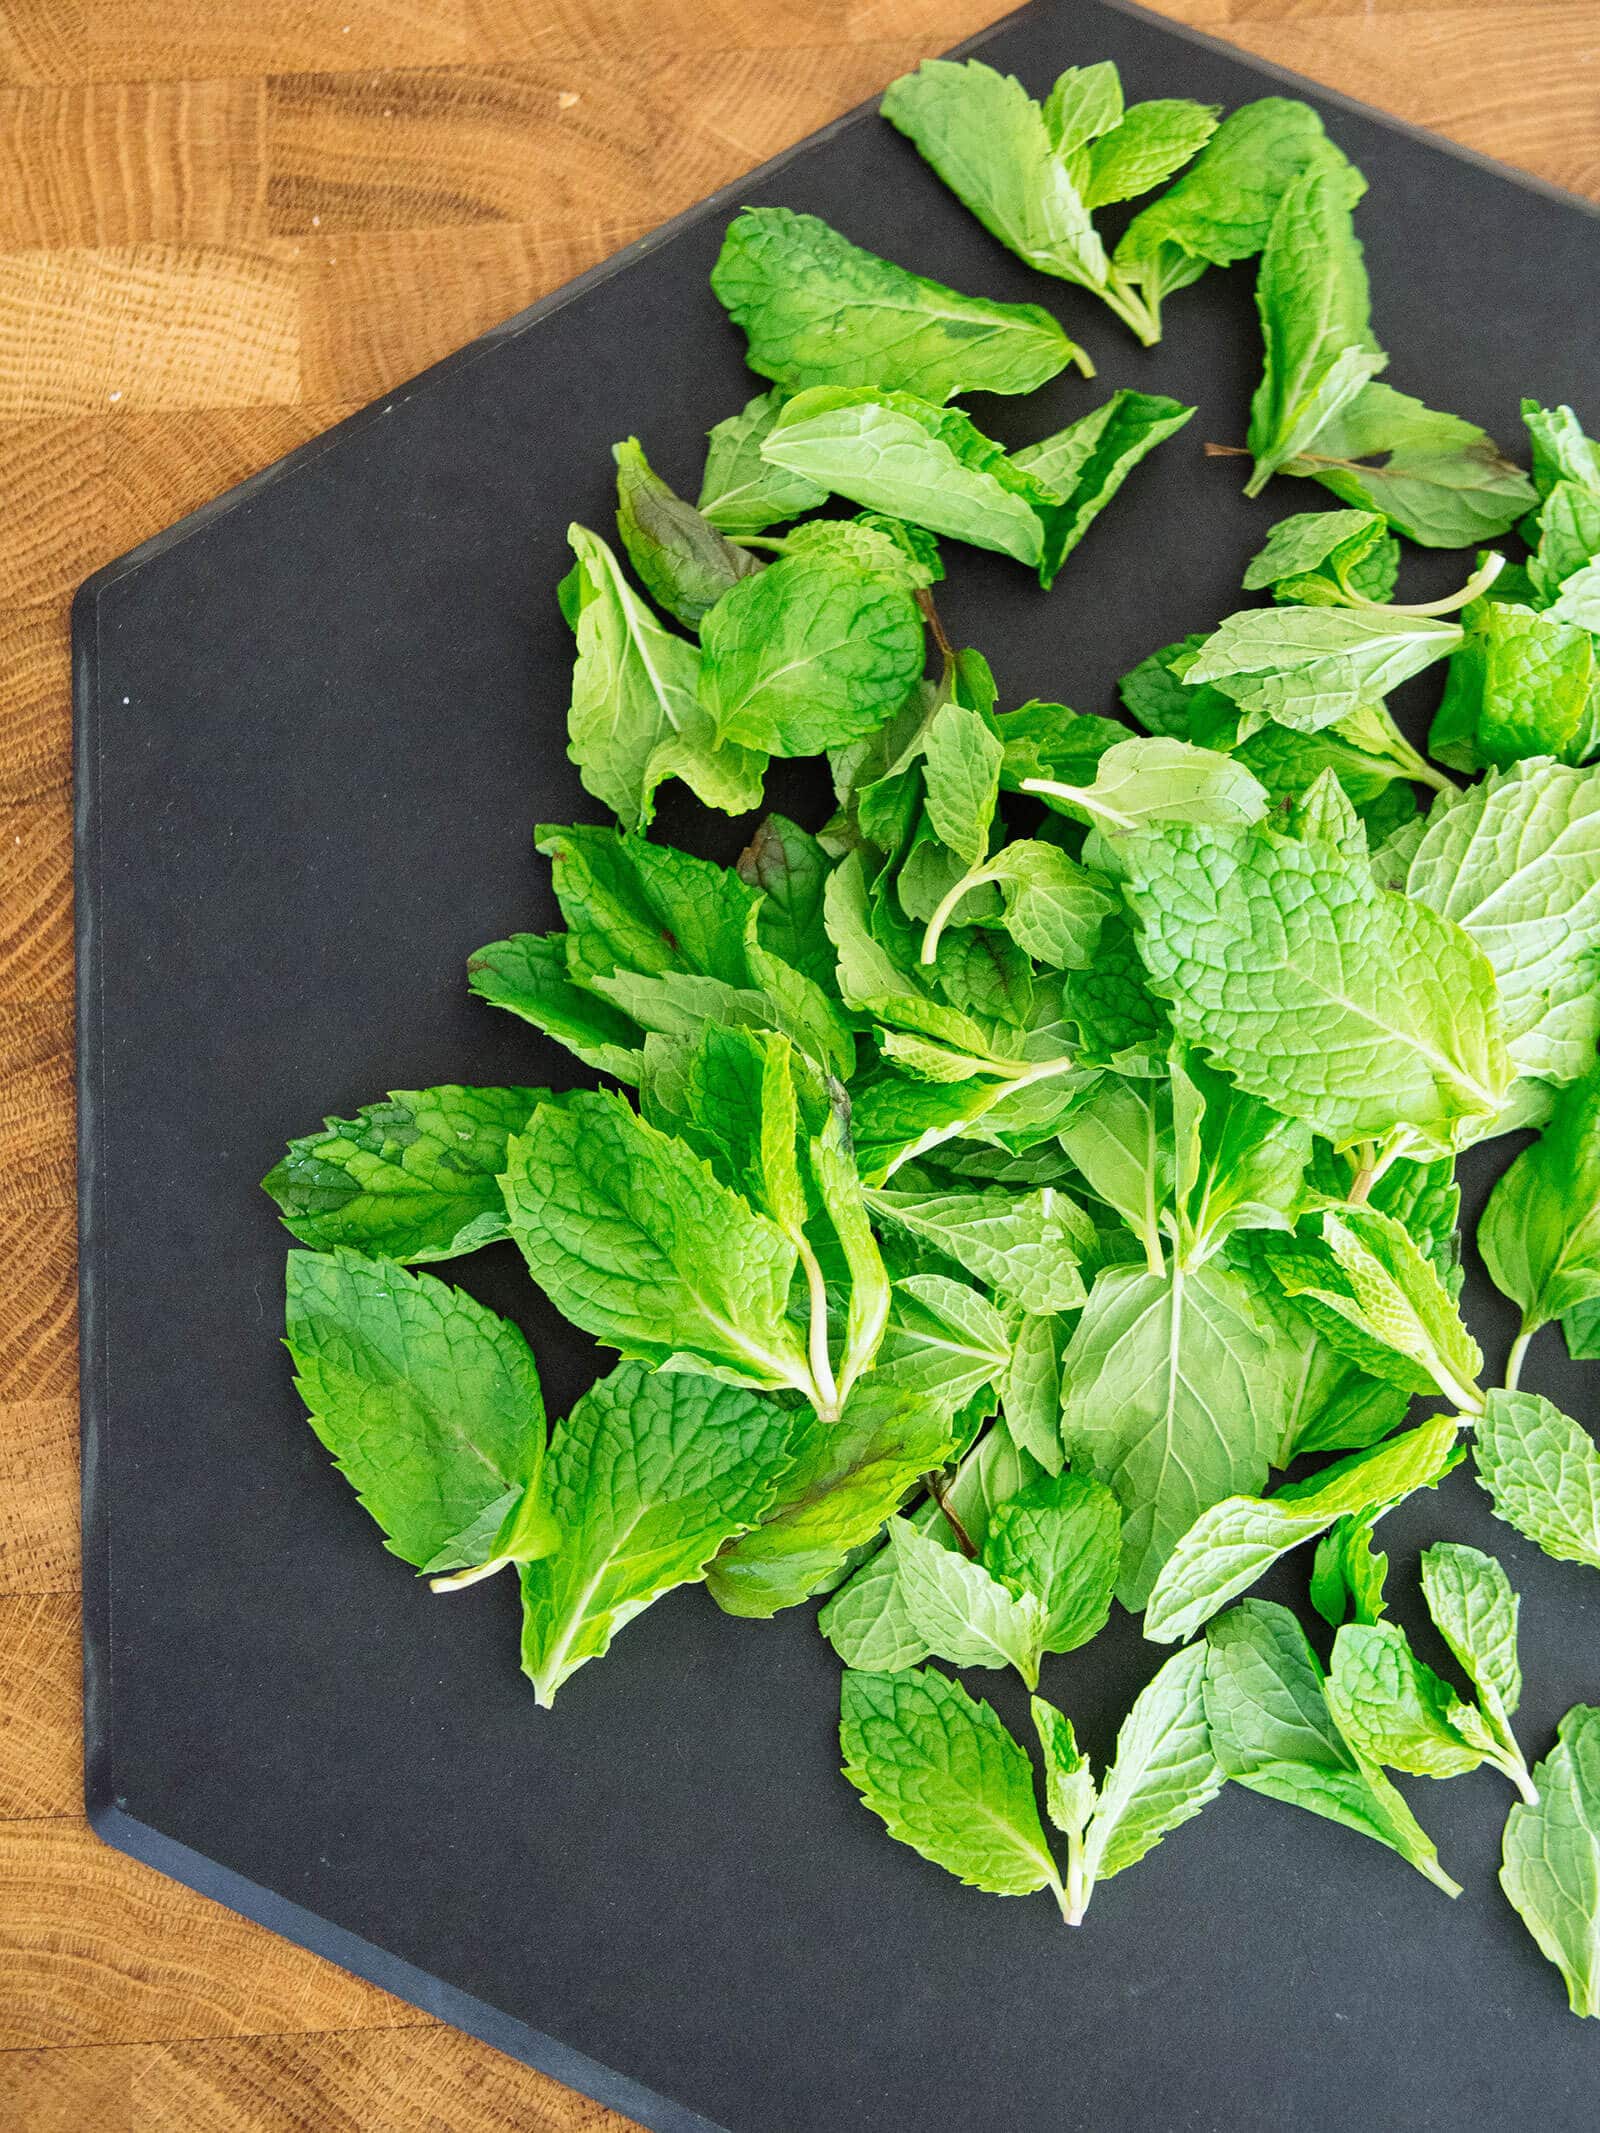 Freshly picked mint leaves spread out on a black cutting board